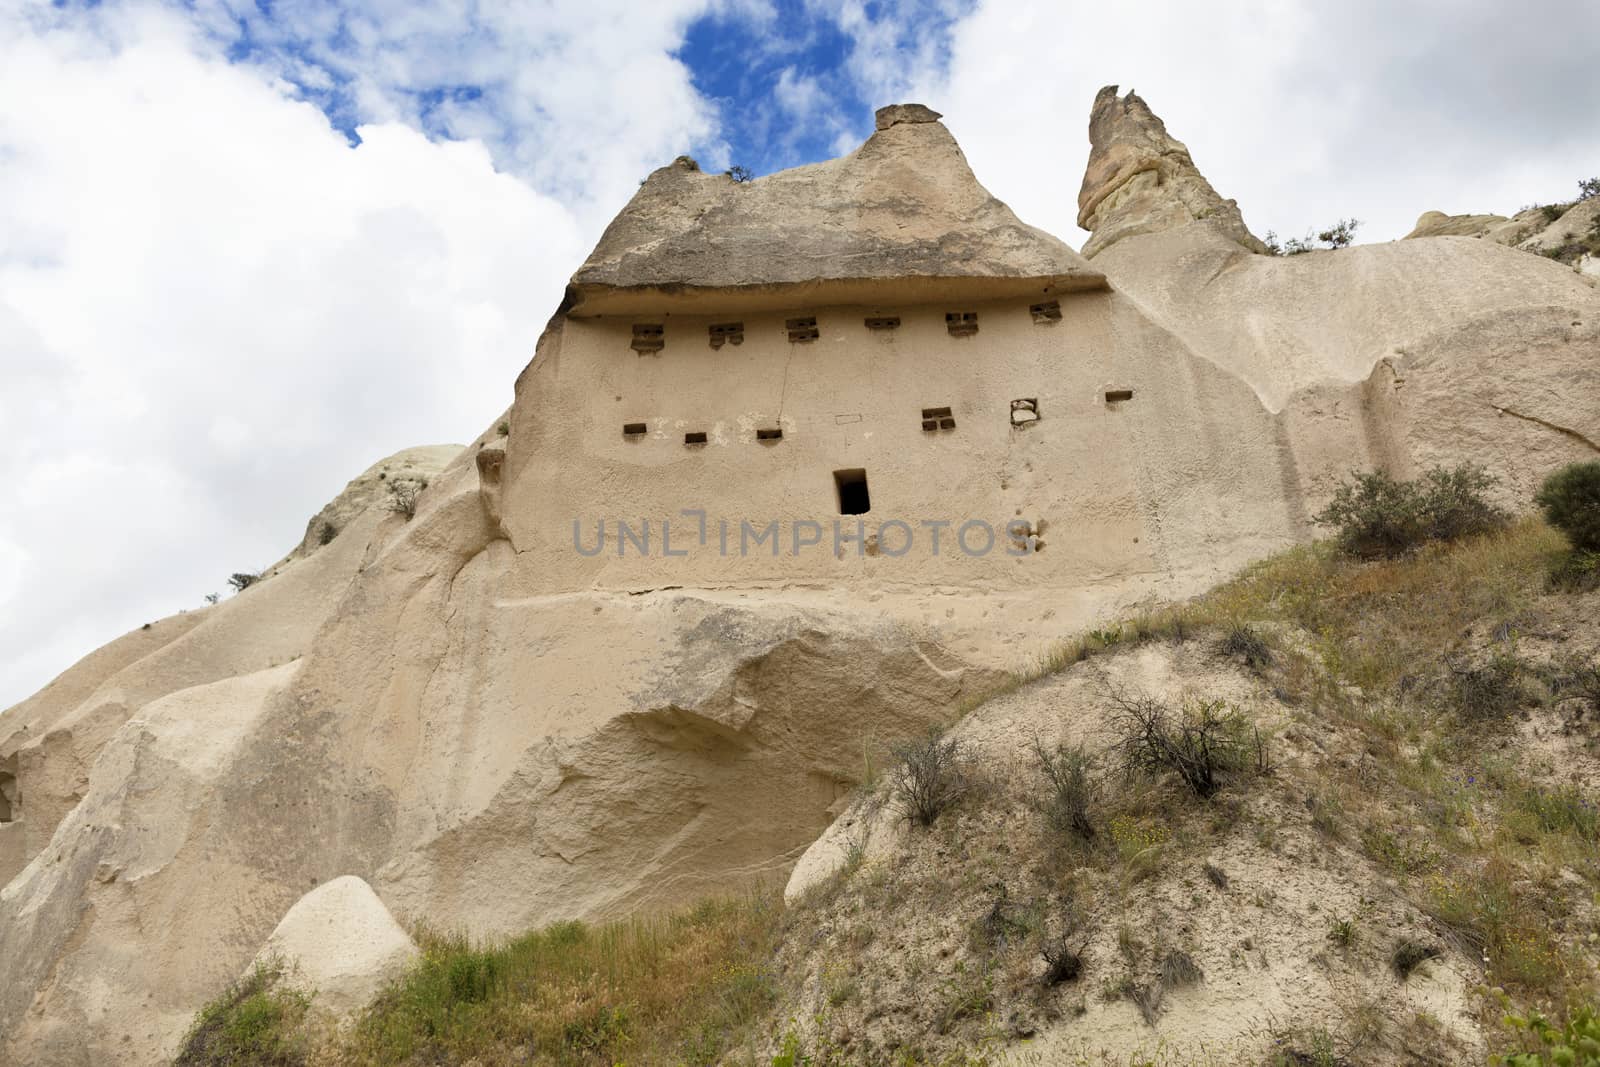 Abandoned caves in the Cappadocia mountains against the blue sky